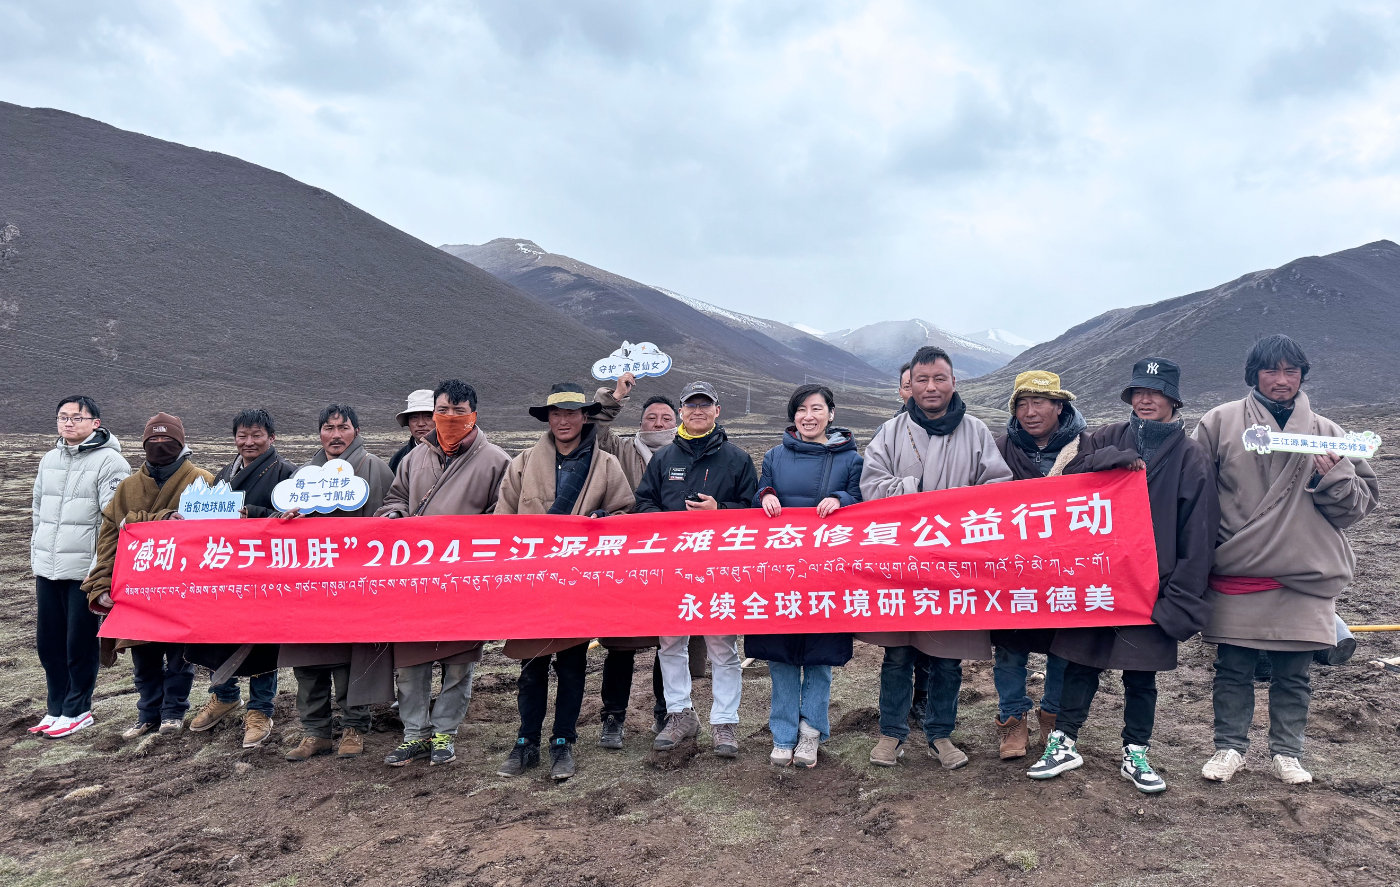  Gao Demi announced the launch of the second phase of the "touching, starts from the skin" Black Earth Beach restoration social welfare project